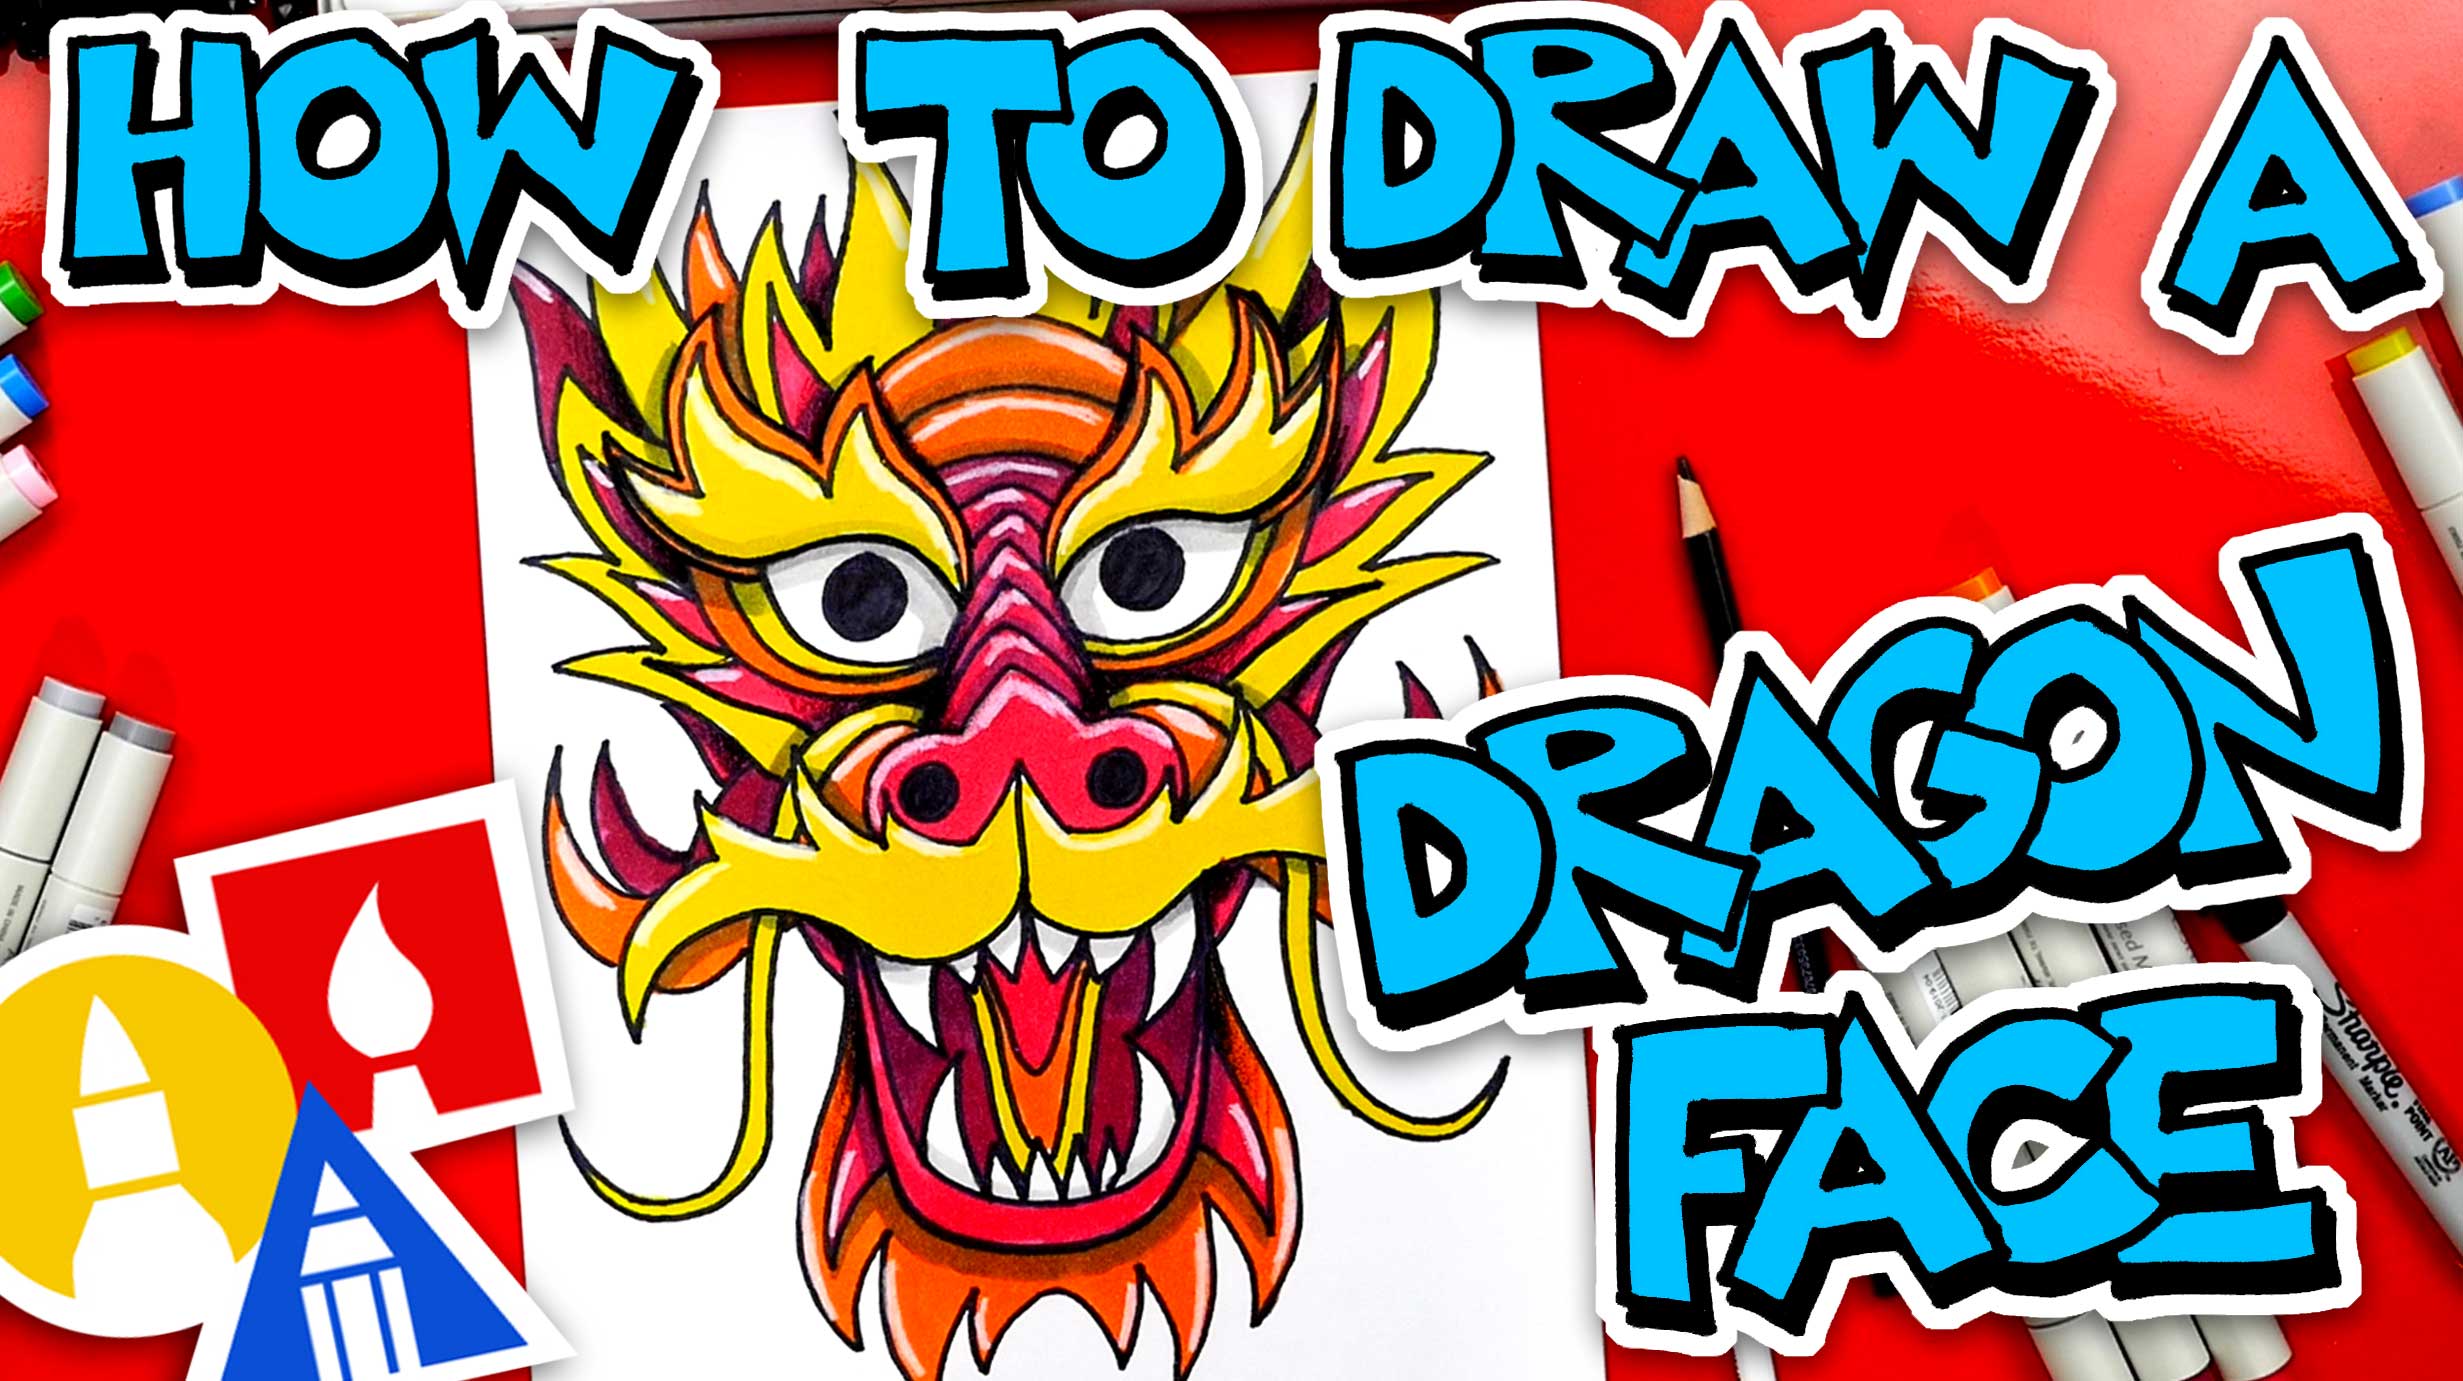 Top How To Draw A Chinese Face of the decade Check it out now 